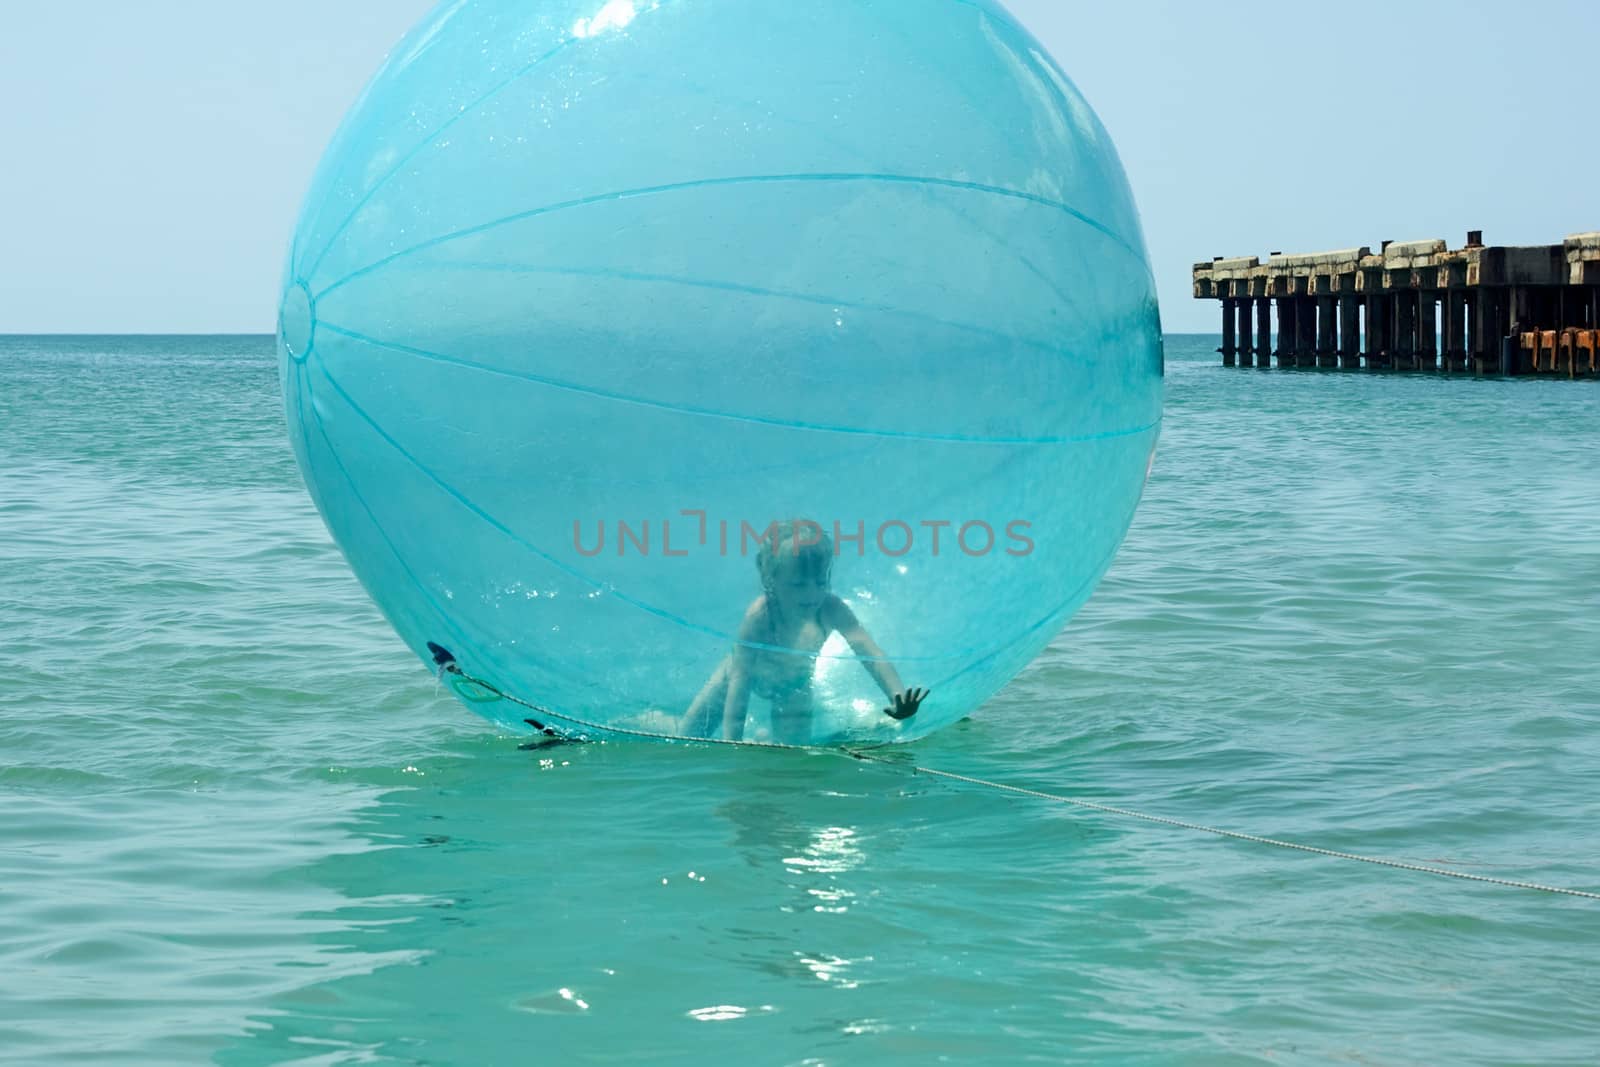 Little girl inside a giant balloon on the sea surface by qiiip